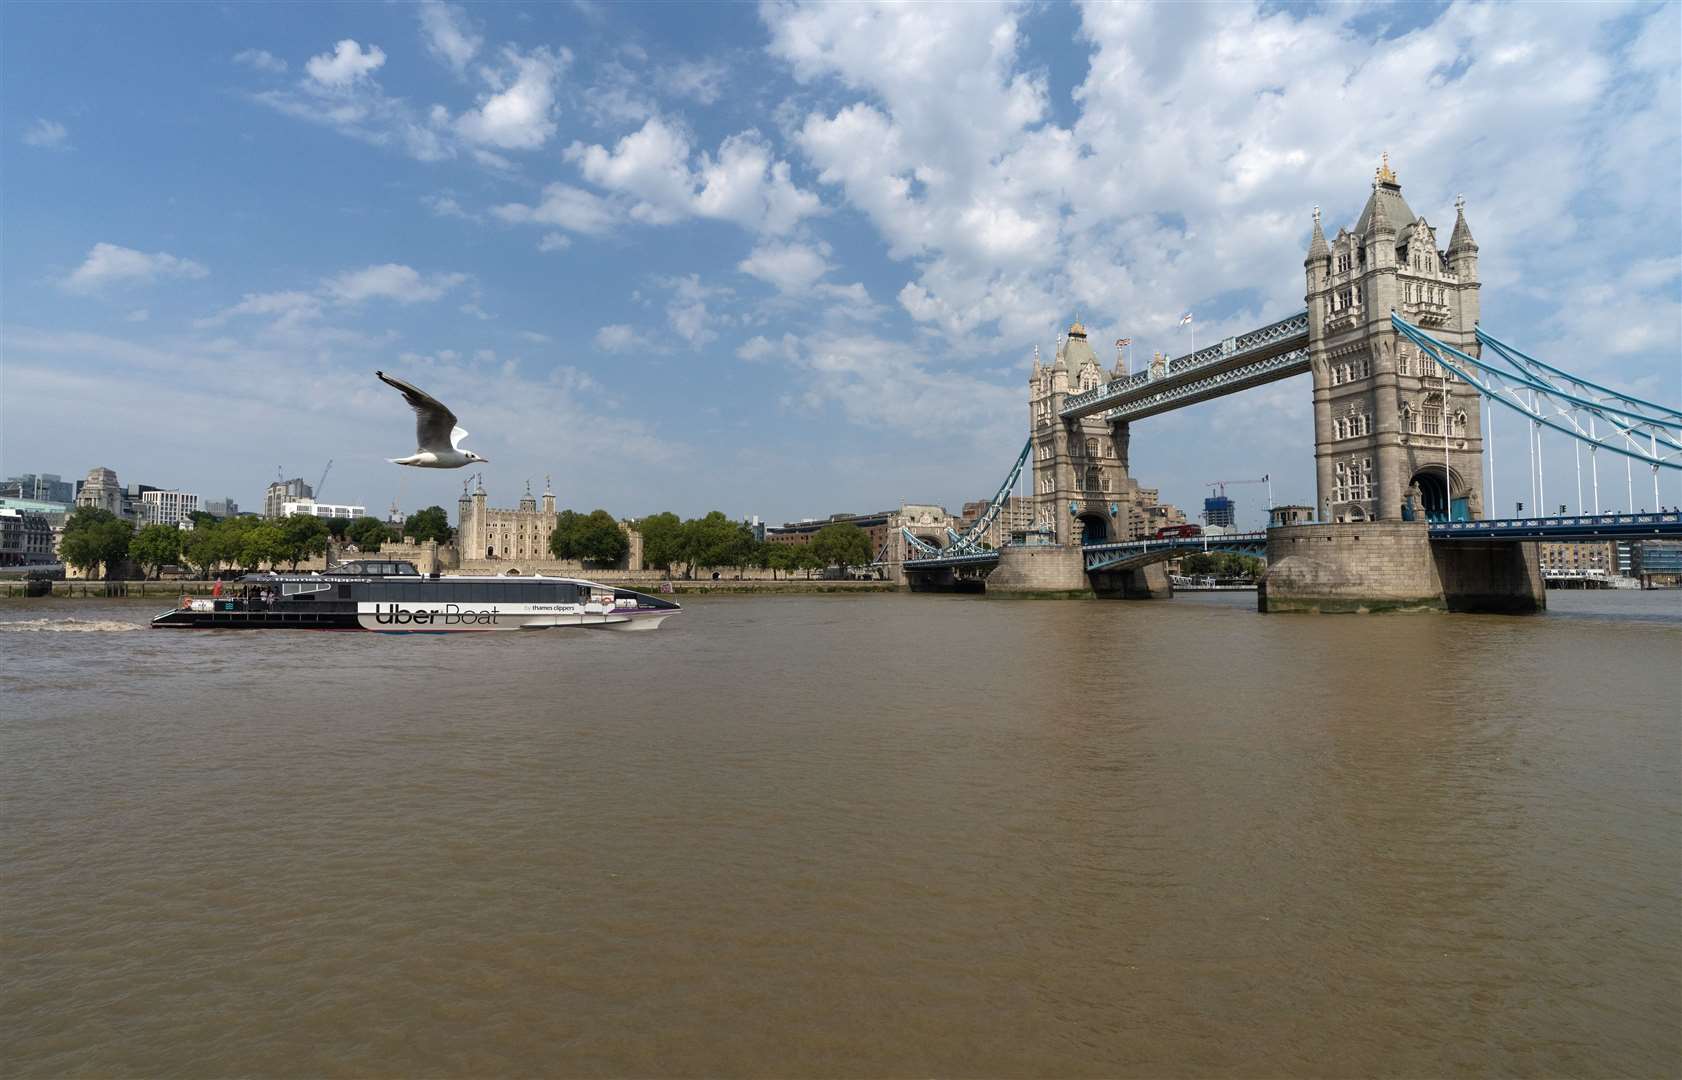 Uber Boats have run summer services from Gravesend to Greenwich and London